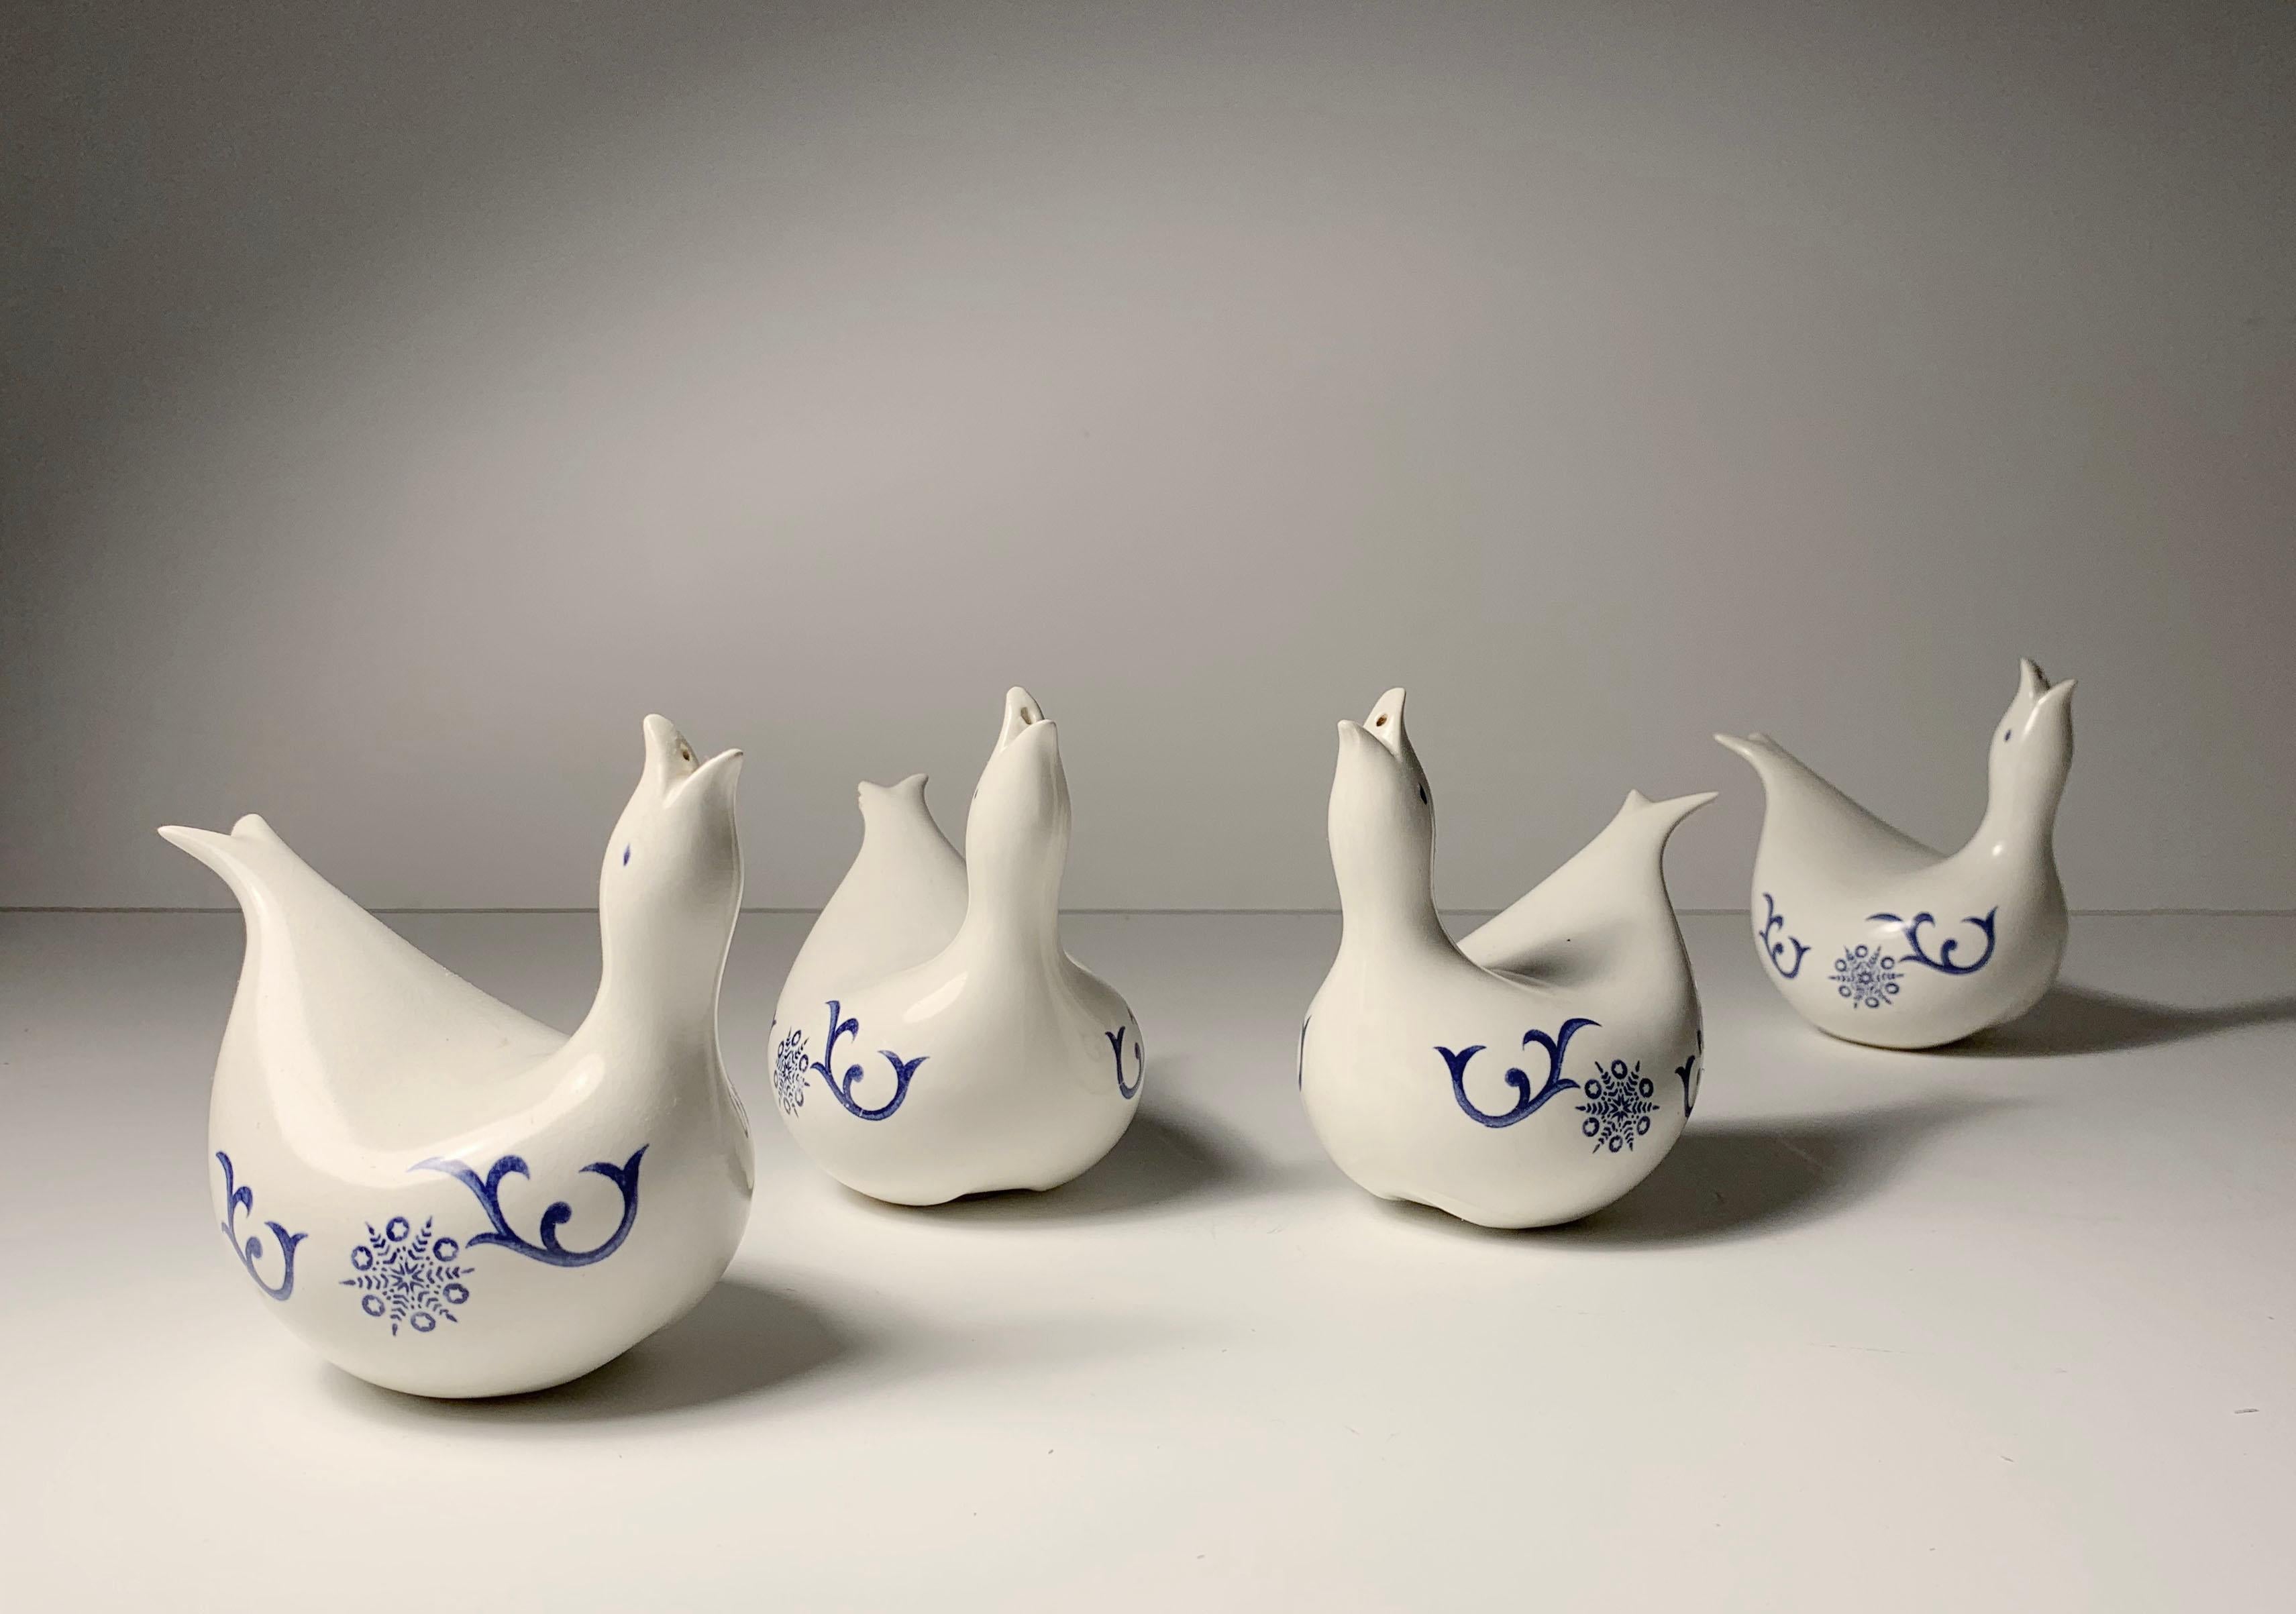 Eva Zeisel scarce salt and pepper birds for NKT Japan



2 of the birds have loss damage to tails.

the other 2 are in nice condition with a minor knick too tail on one. Worth a small ceramic restoration to the tails on these given the rarity of